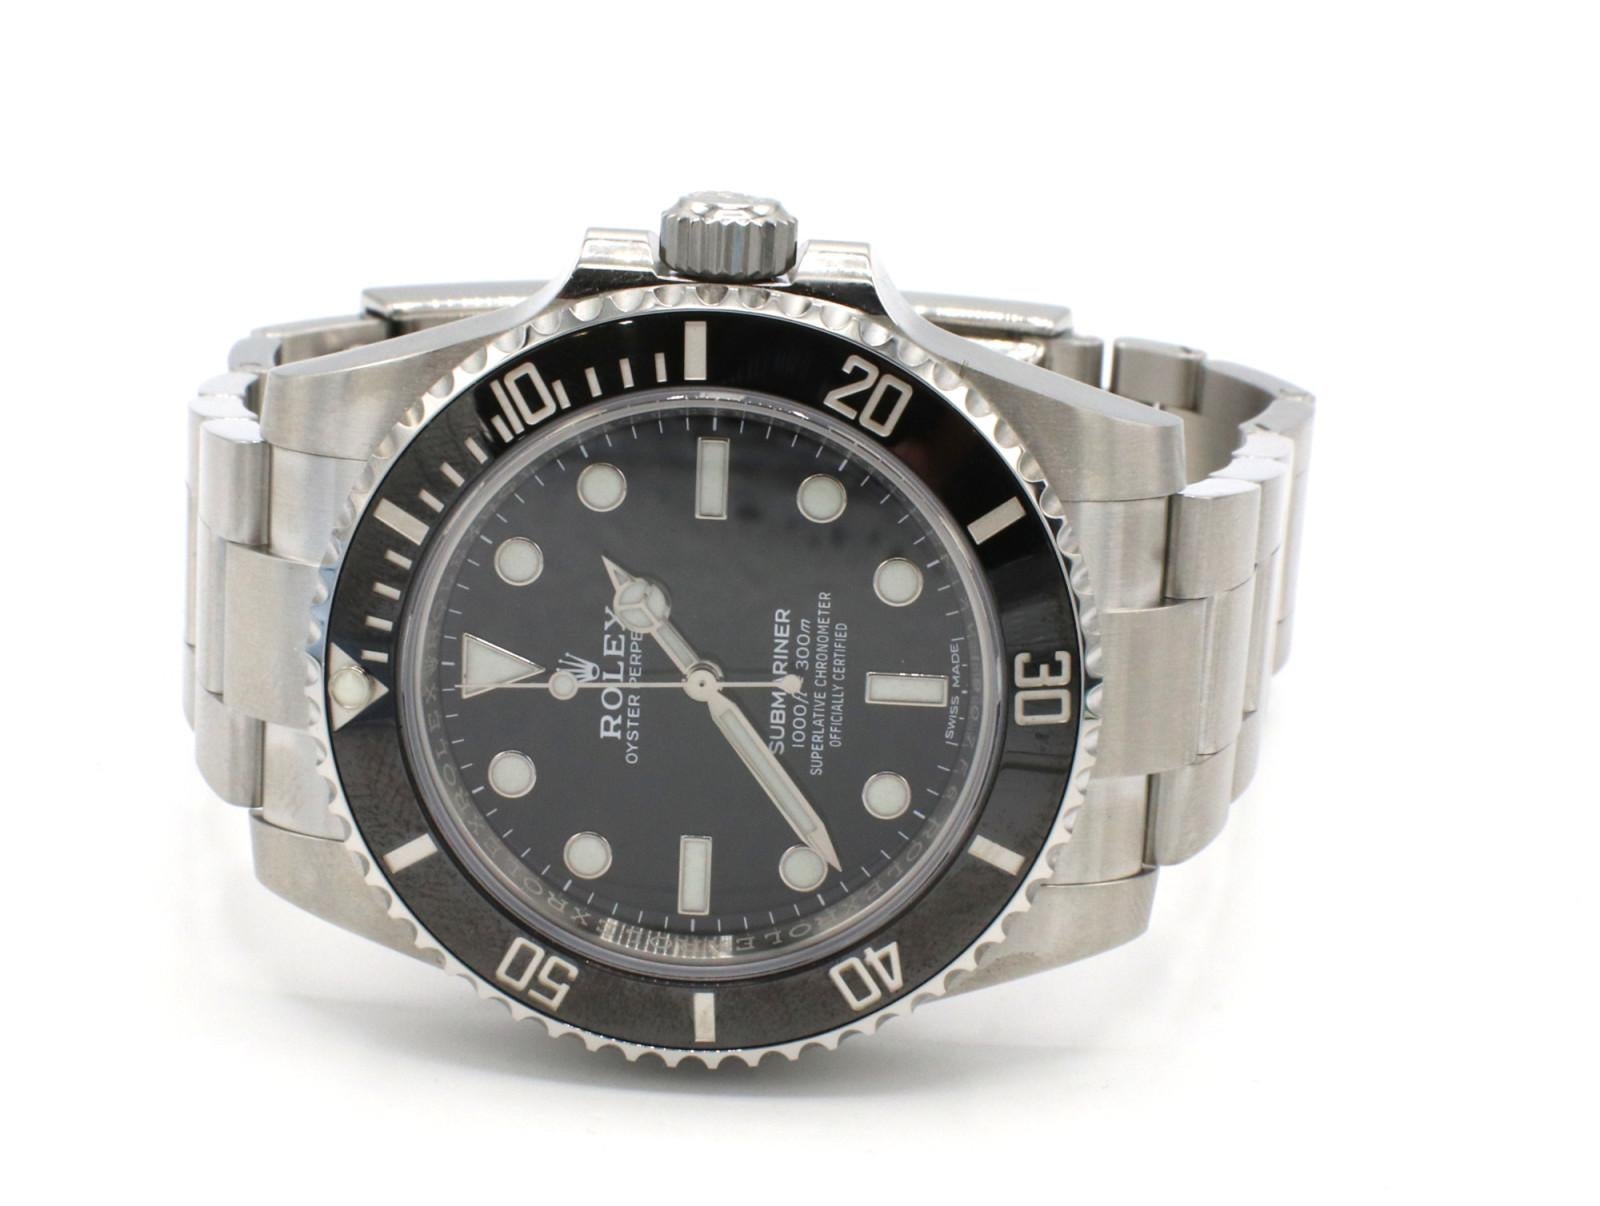 Montre Rolex Submariner Stainless Steel No Date Reference 114060 Pour hommes en vente